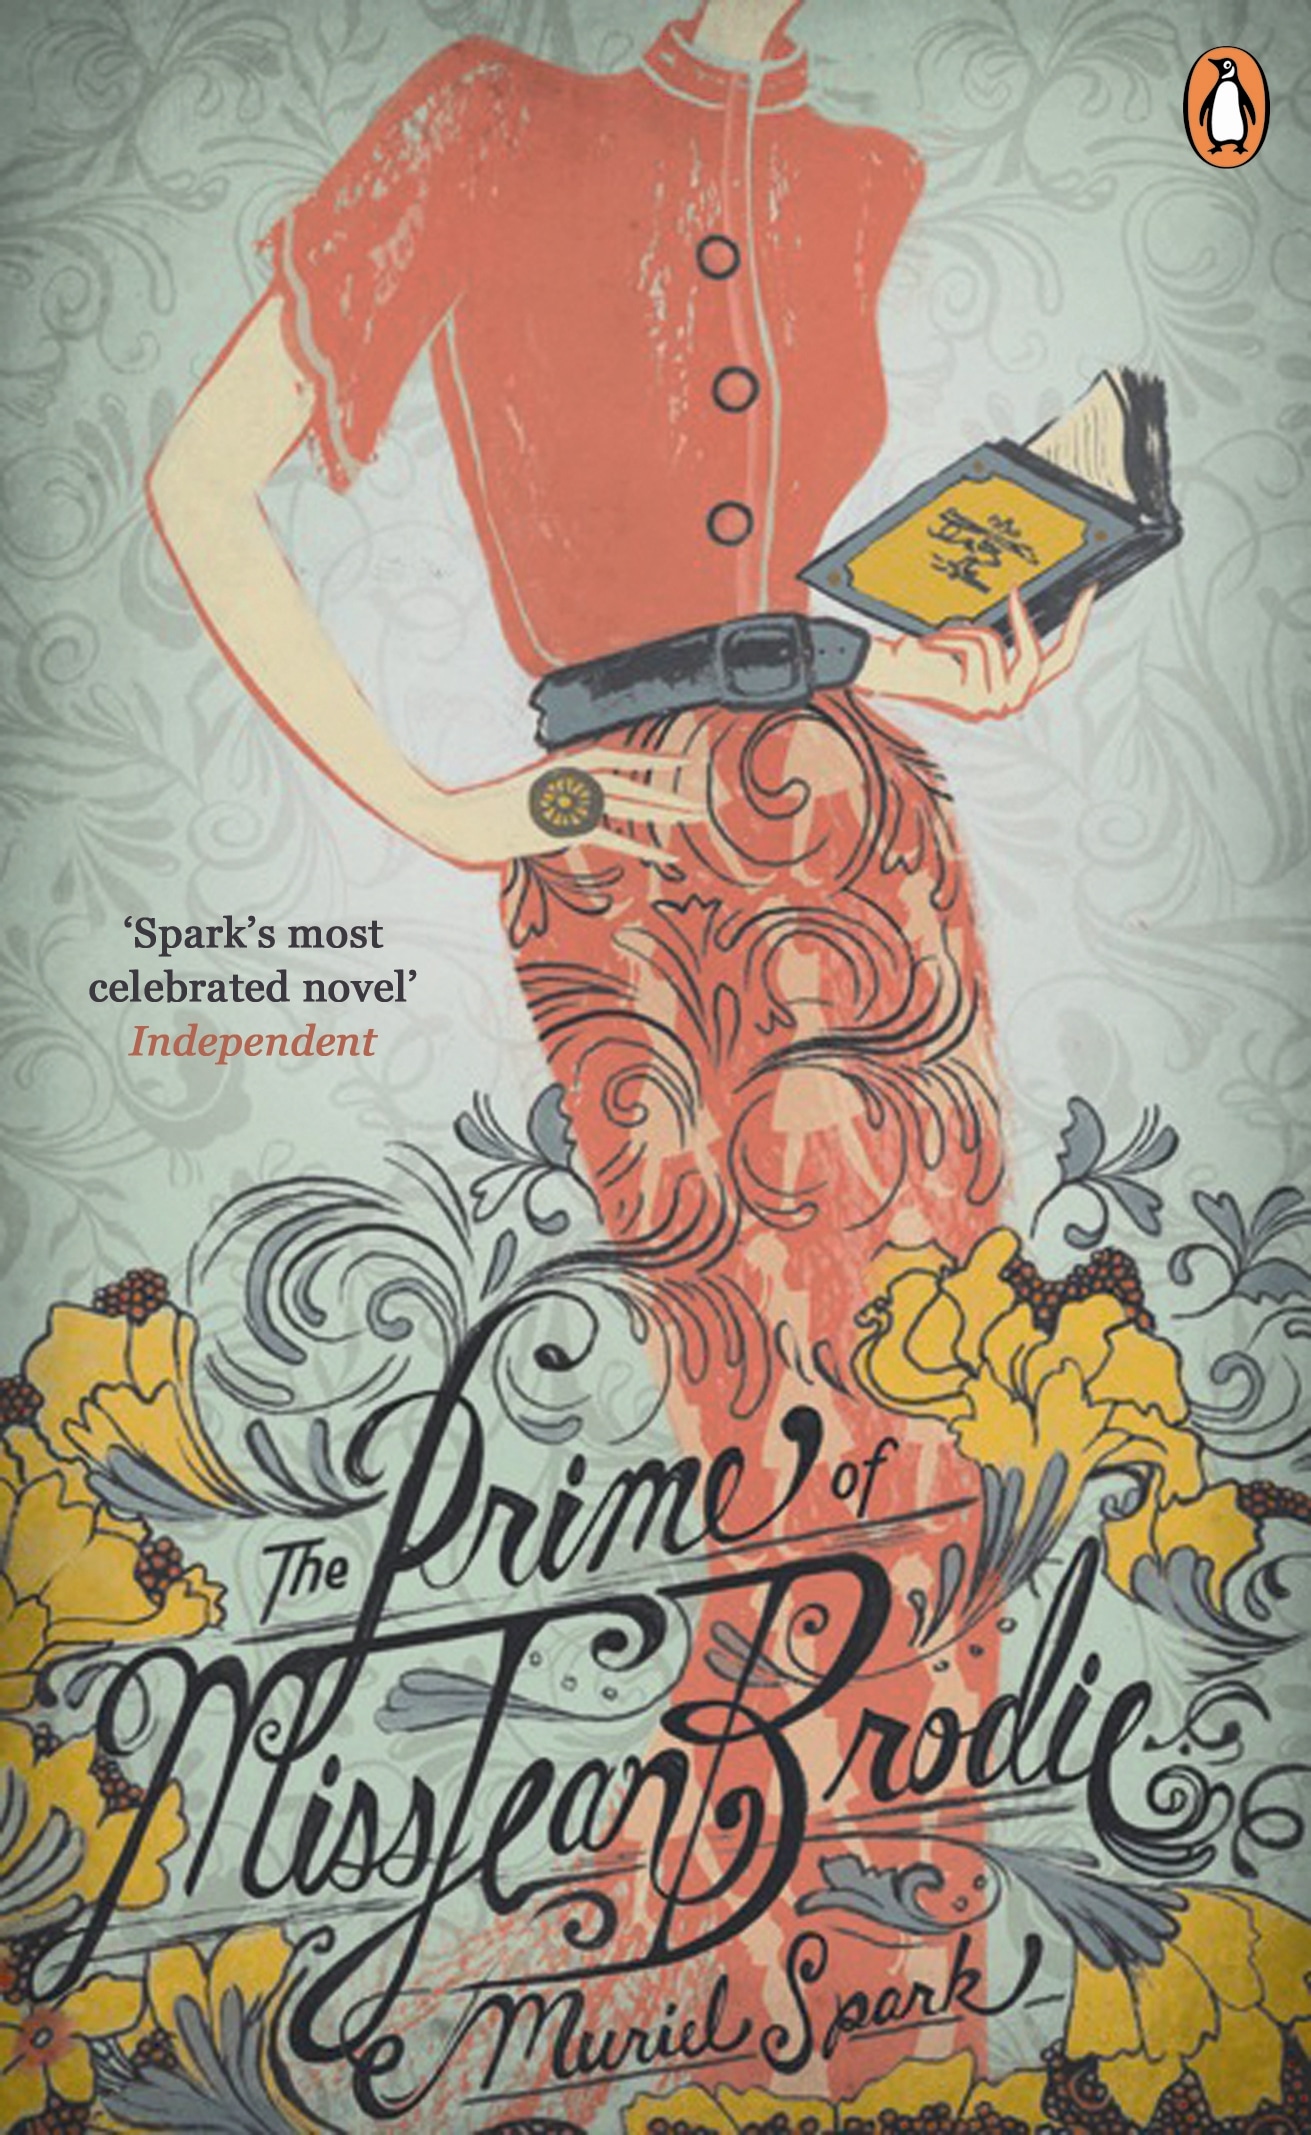 Book “The Prime of Miss Jean Brodie” by Muriel Spark — April 5, 2012